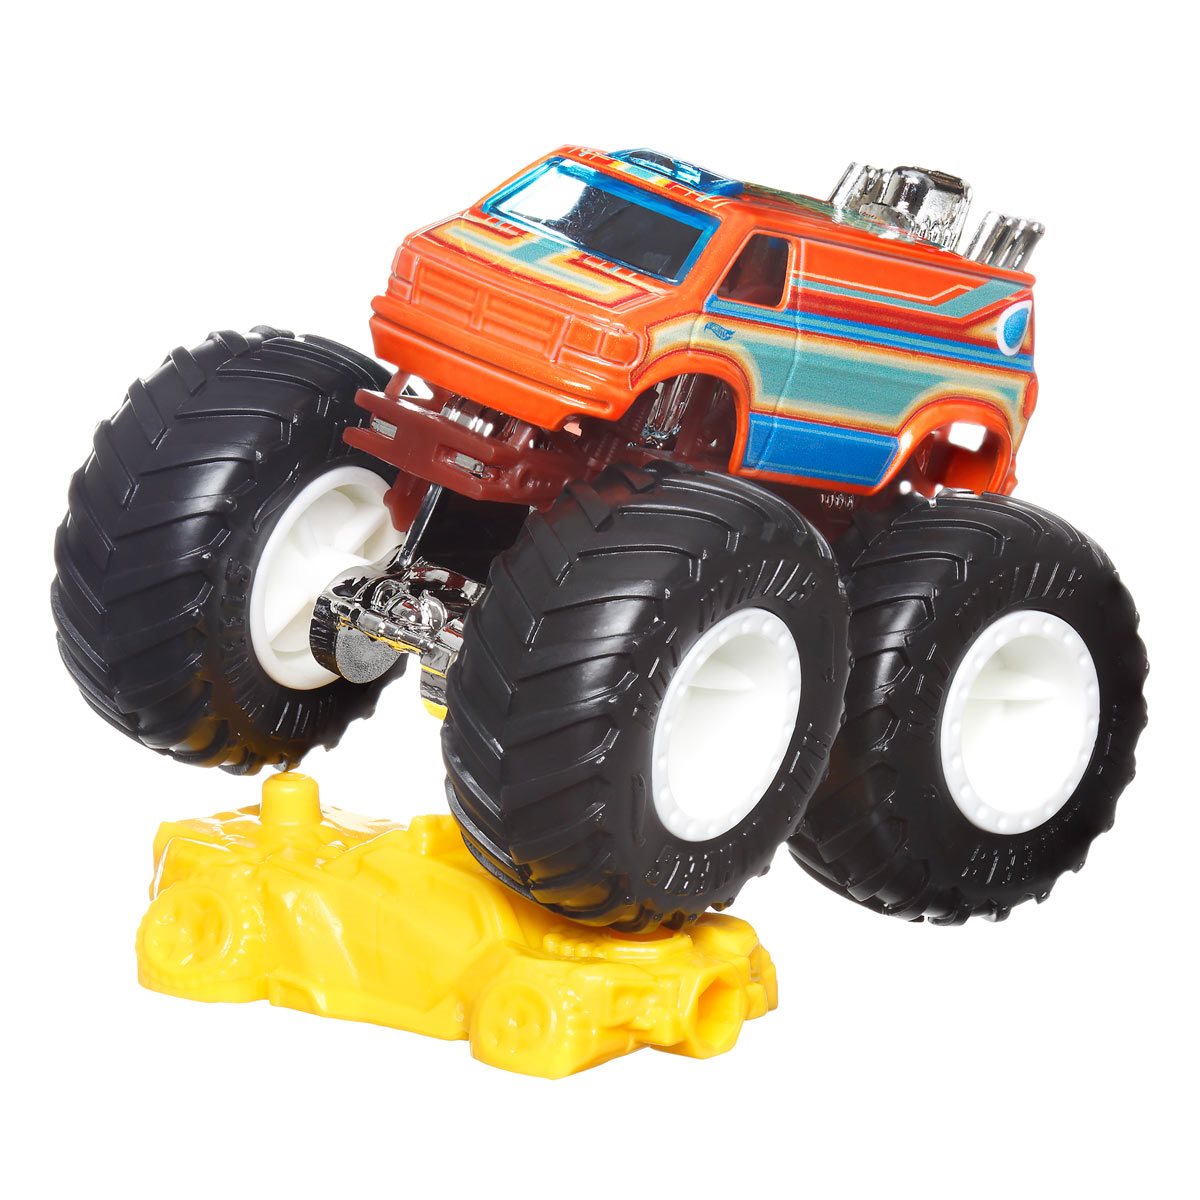 San Diego Moms: 5 Reasons to See Hot Wheels Monster Trucks Live in San  Diego - Times of San Diego